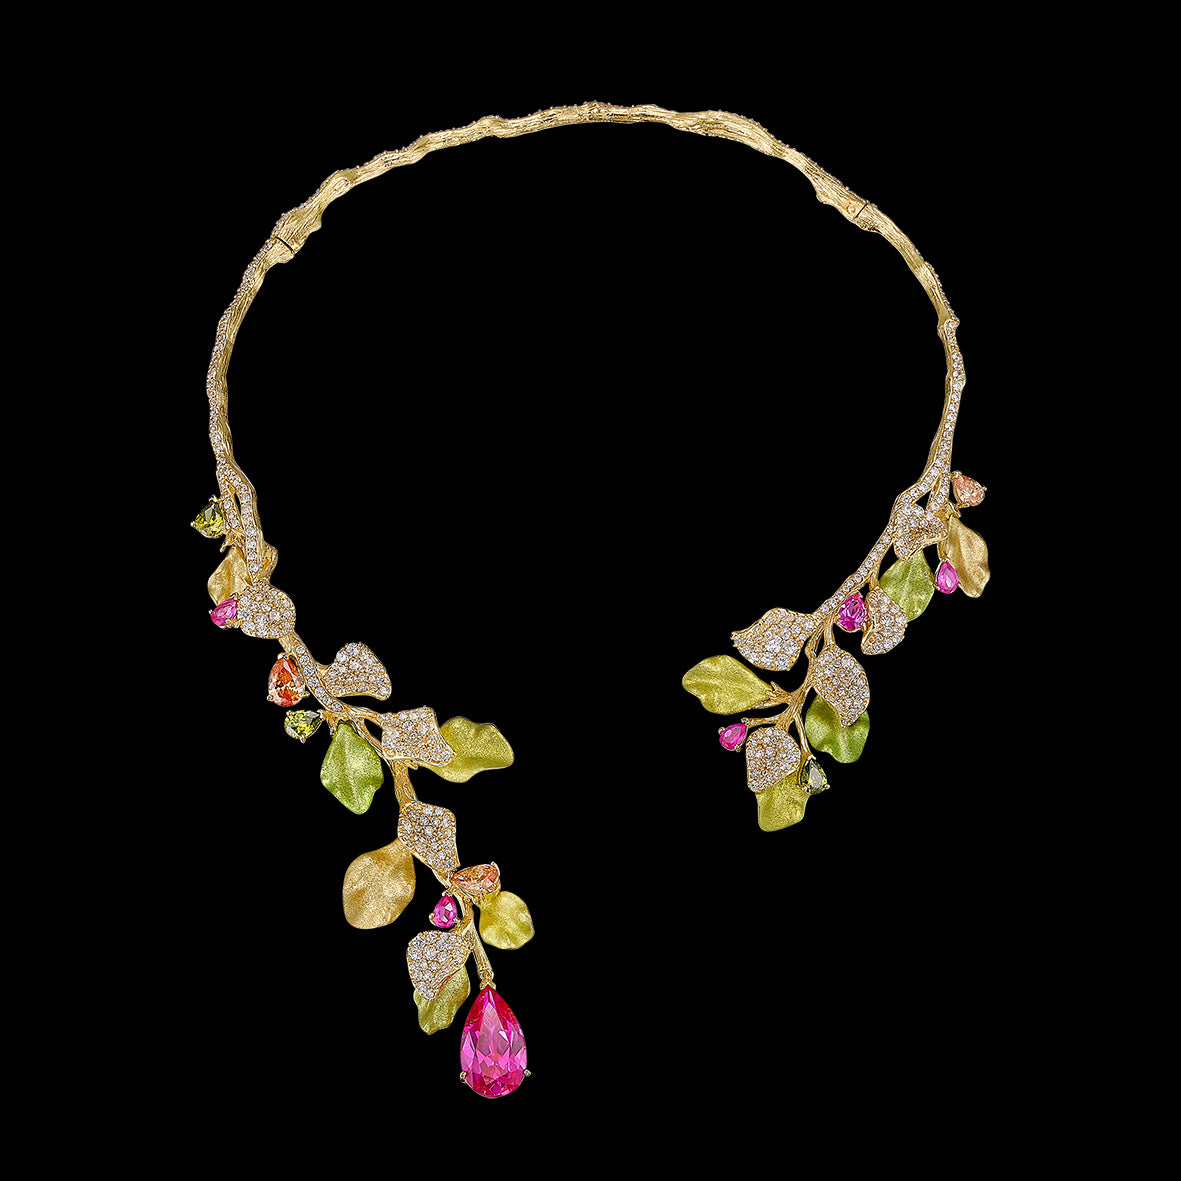 Lemon Fuchsia Thea Collar, Necklace, Anabela Chan Joaillerie - Fine jewelry with laboratory grown and created gemstones hand-crafted in the United Kingdom. Anabela Chan Joaillerie is the first fine jewellery brand in the world to champion laboratory-grown and created gemstones with high jewellery design, artisanal craftsmanship and a focus on ethical and sustainable innovations.